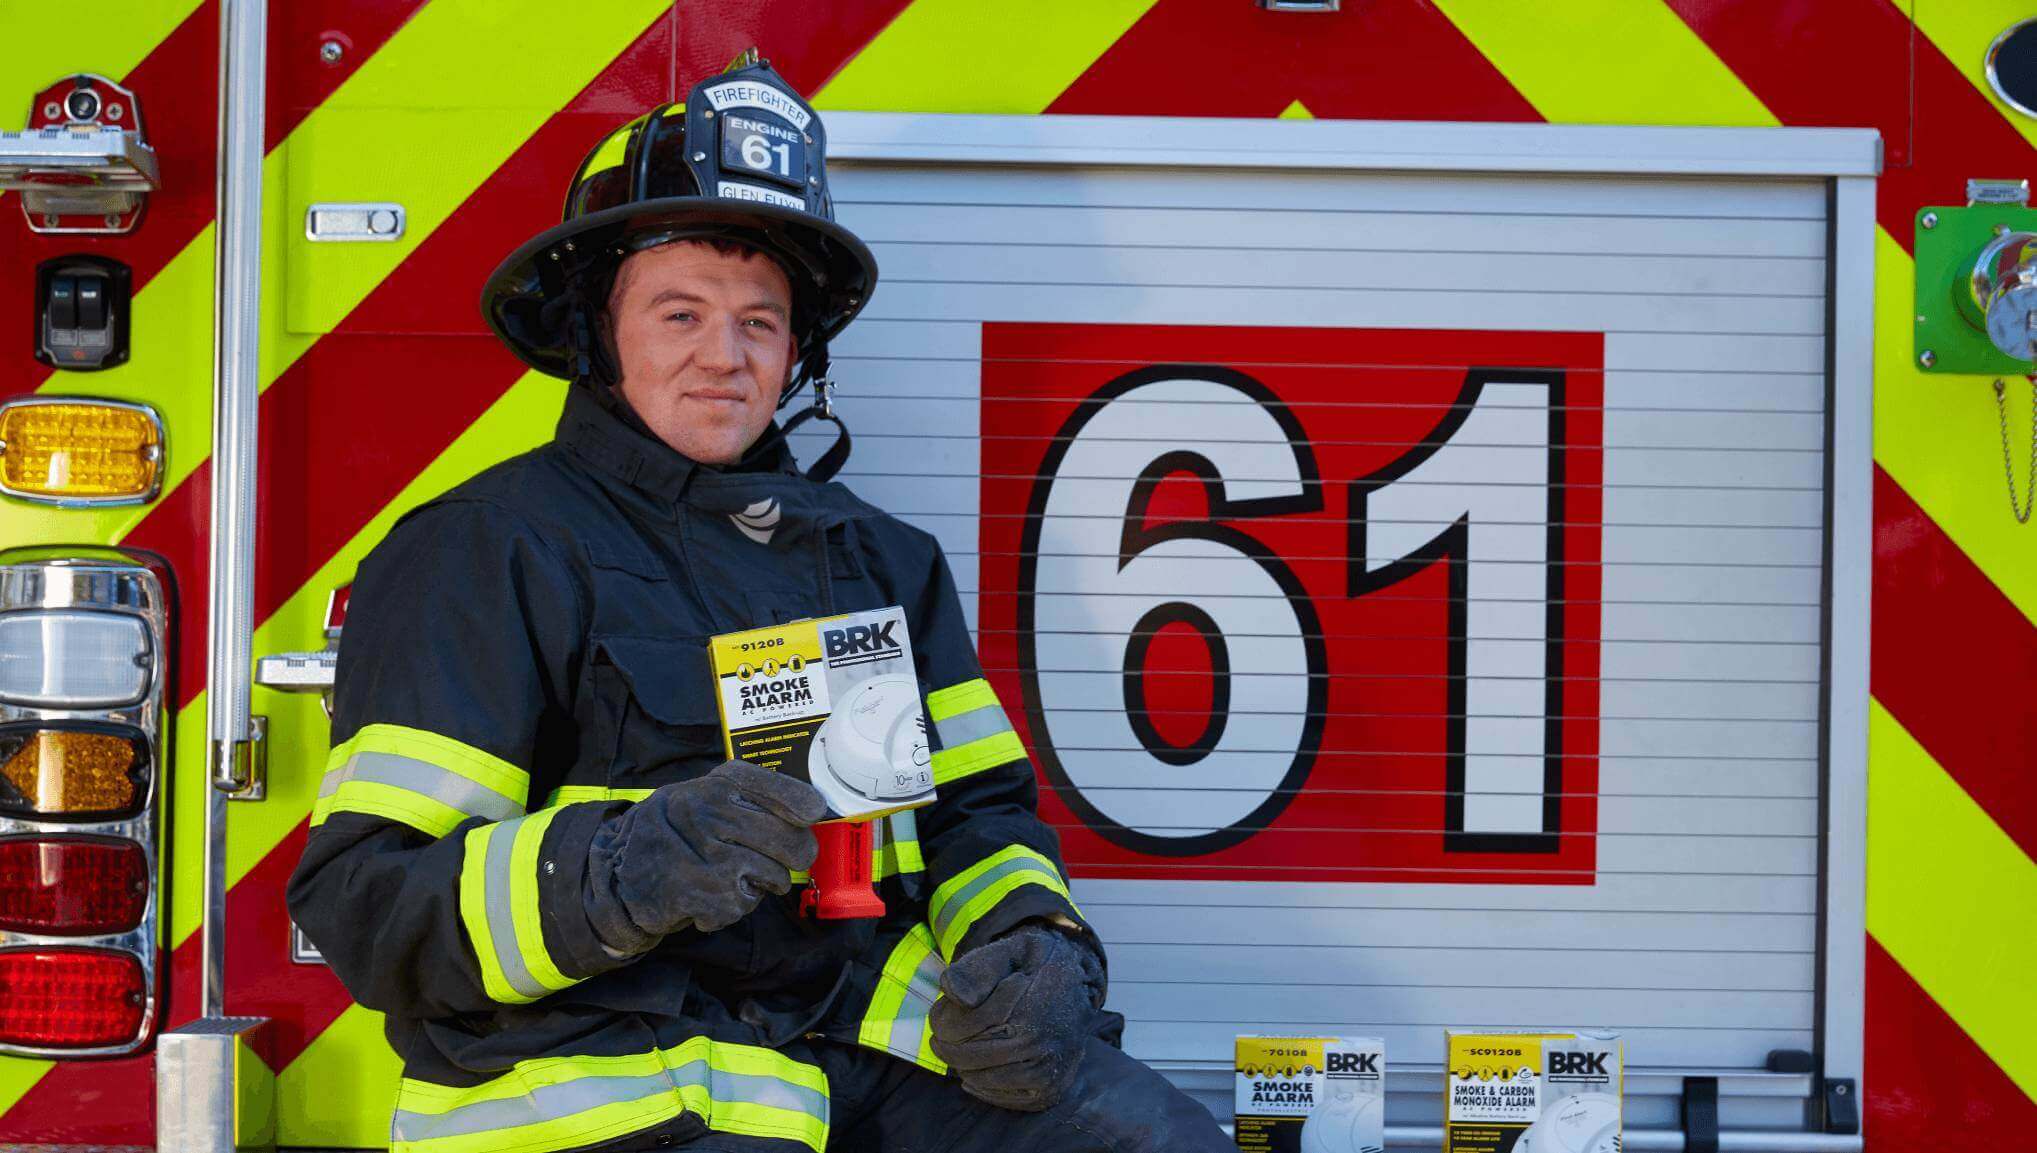 A firefighter holds a smoke alarm and stands next to a firetruck marked 61.